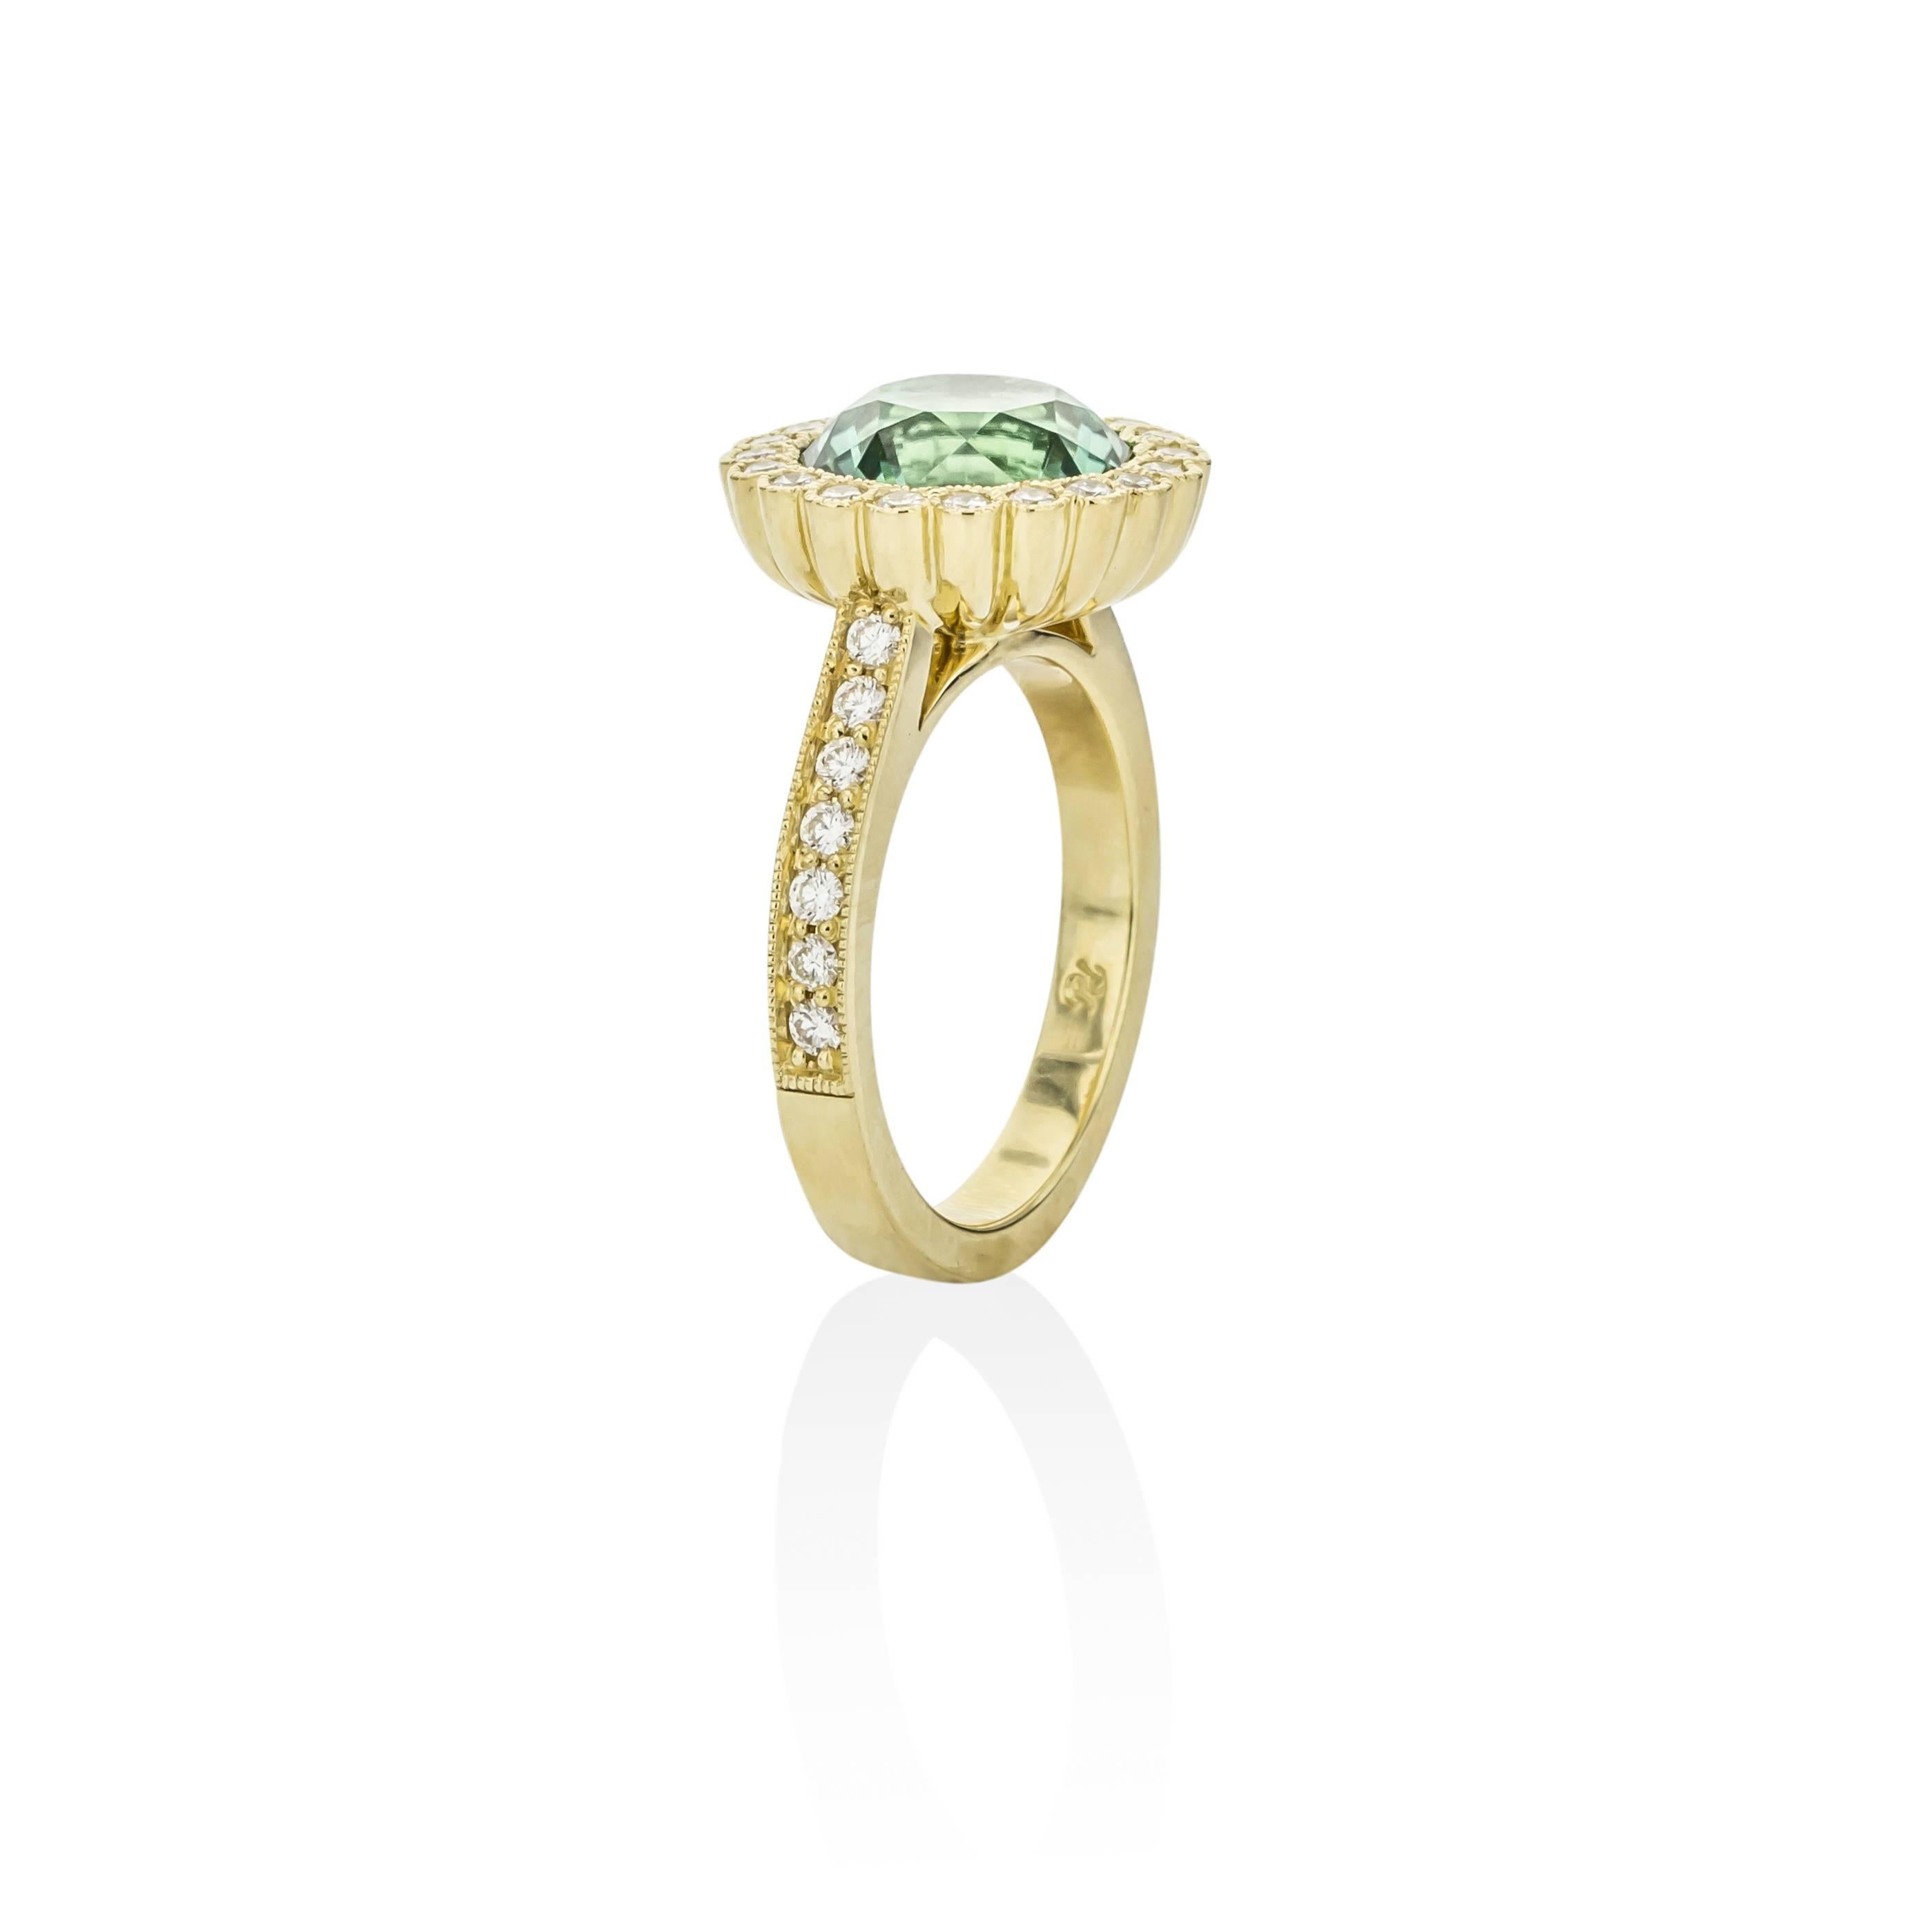 This stunning 18K yellow gold ring is truly one of a kind. 

Features one 4.59 carat round tourmaline stone and 34 diamonds equaling .66 carats. 

This beautiful ring is a size 7 and come in a ring presentation box.